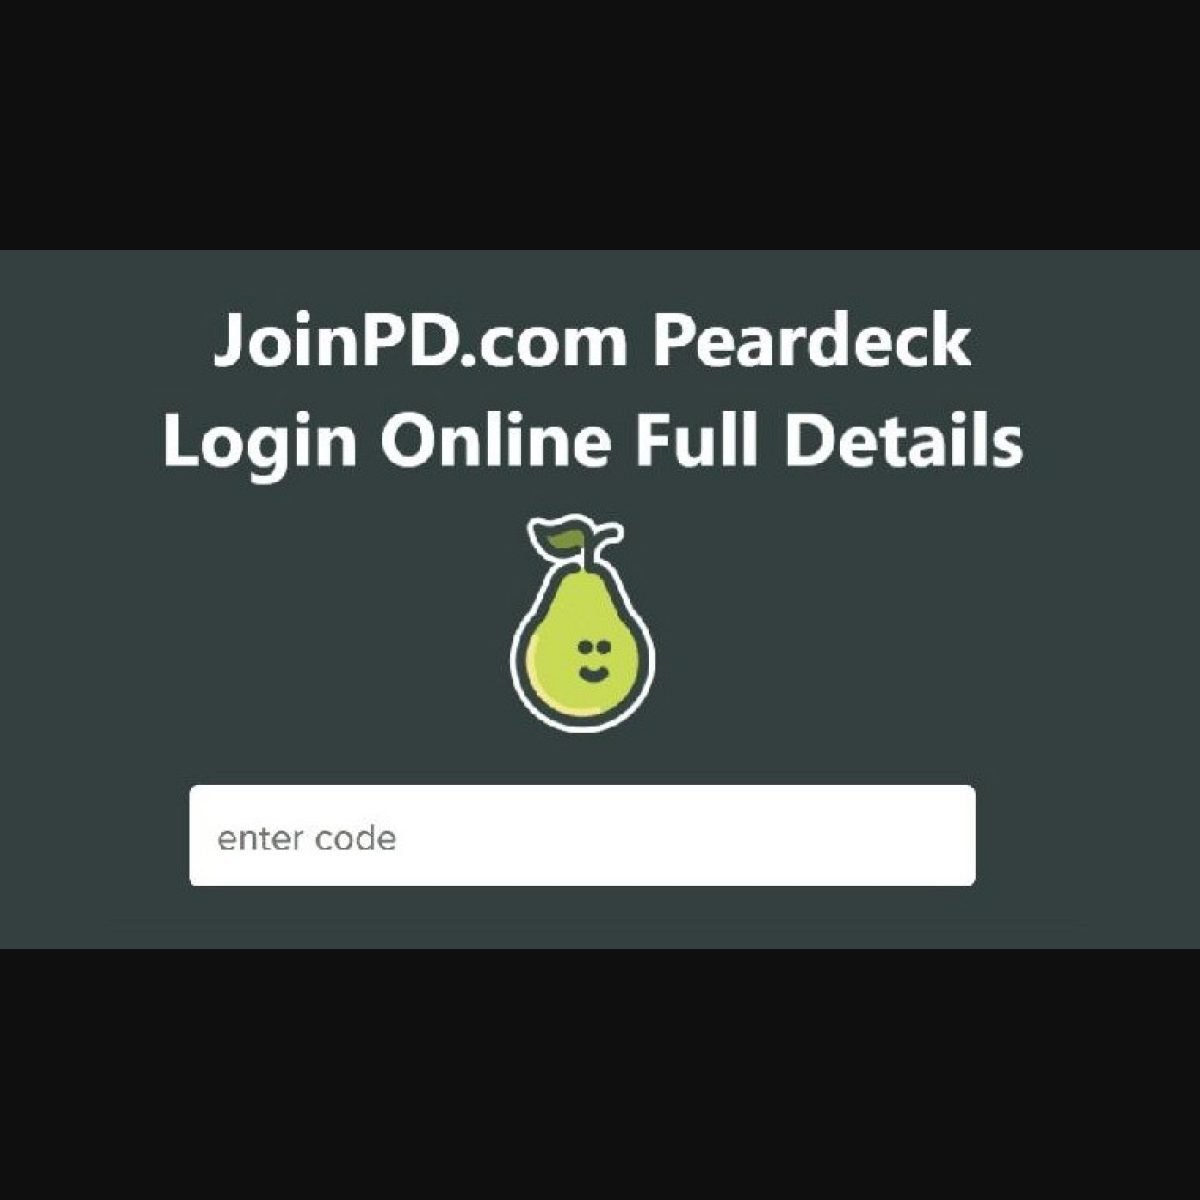 How To Create A JoinPD.com Account: